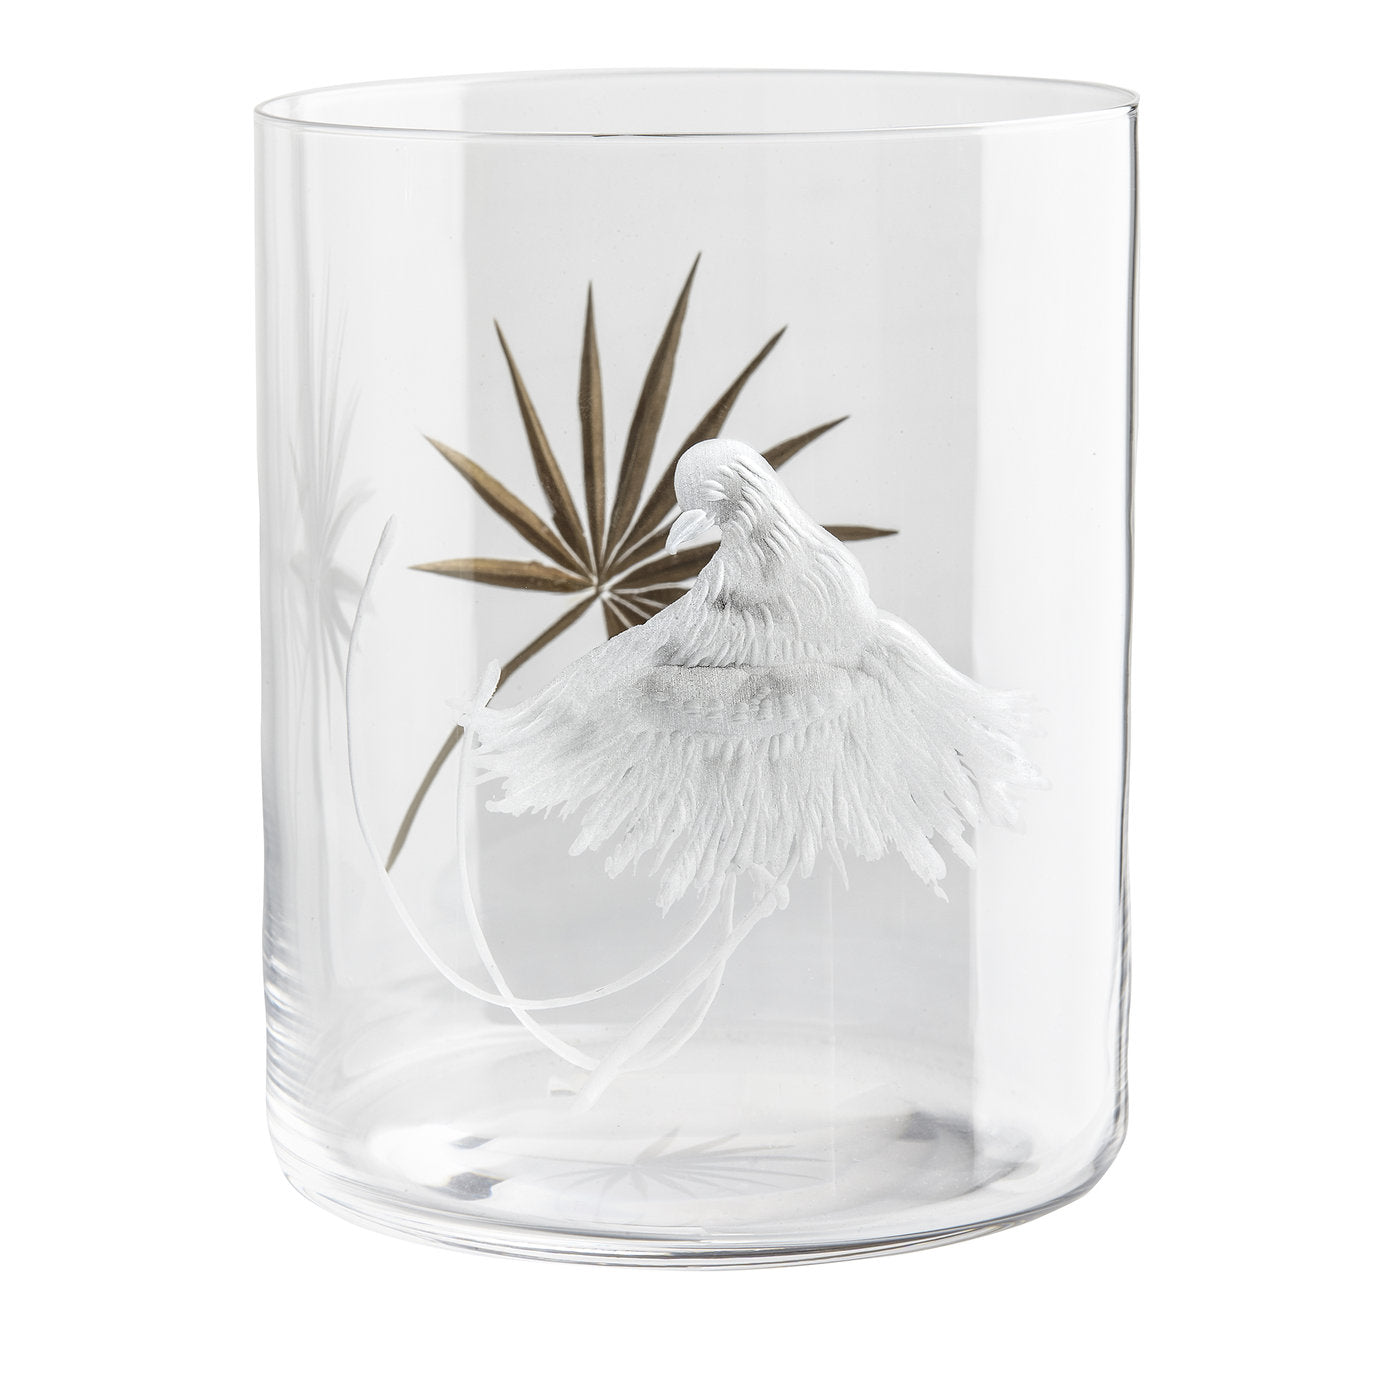 Set of 6 Birds of paradise Crystal Glasses - Alternative view 2